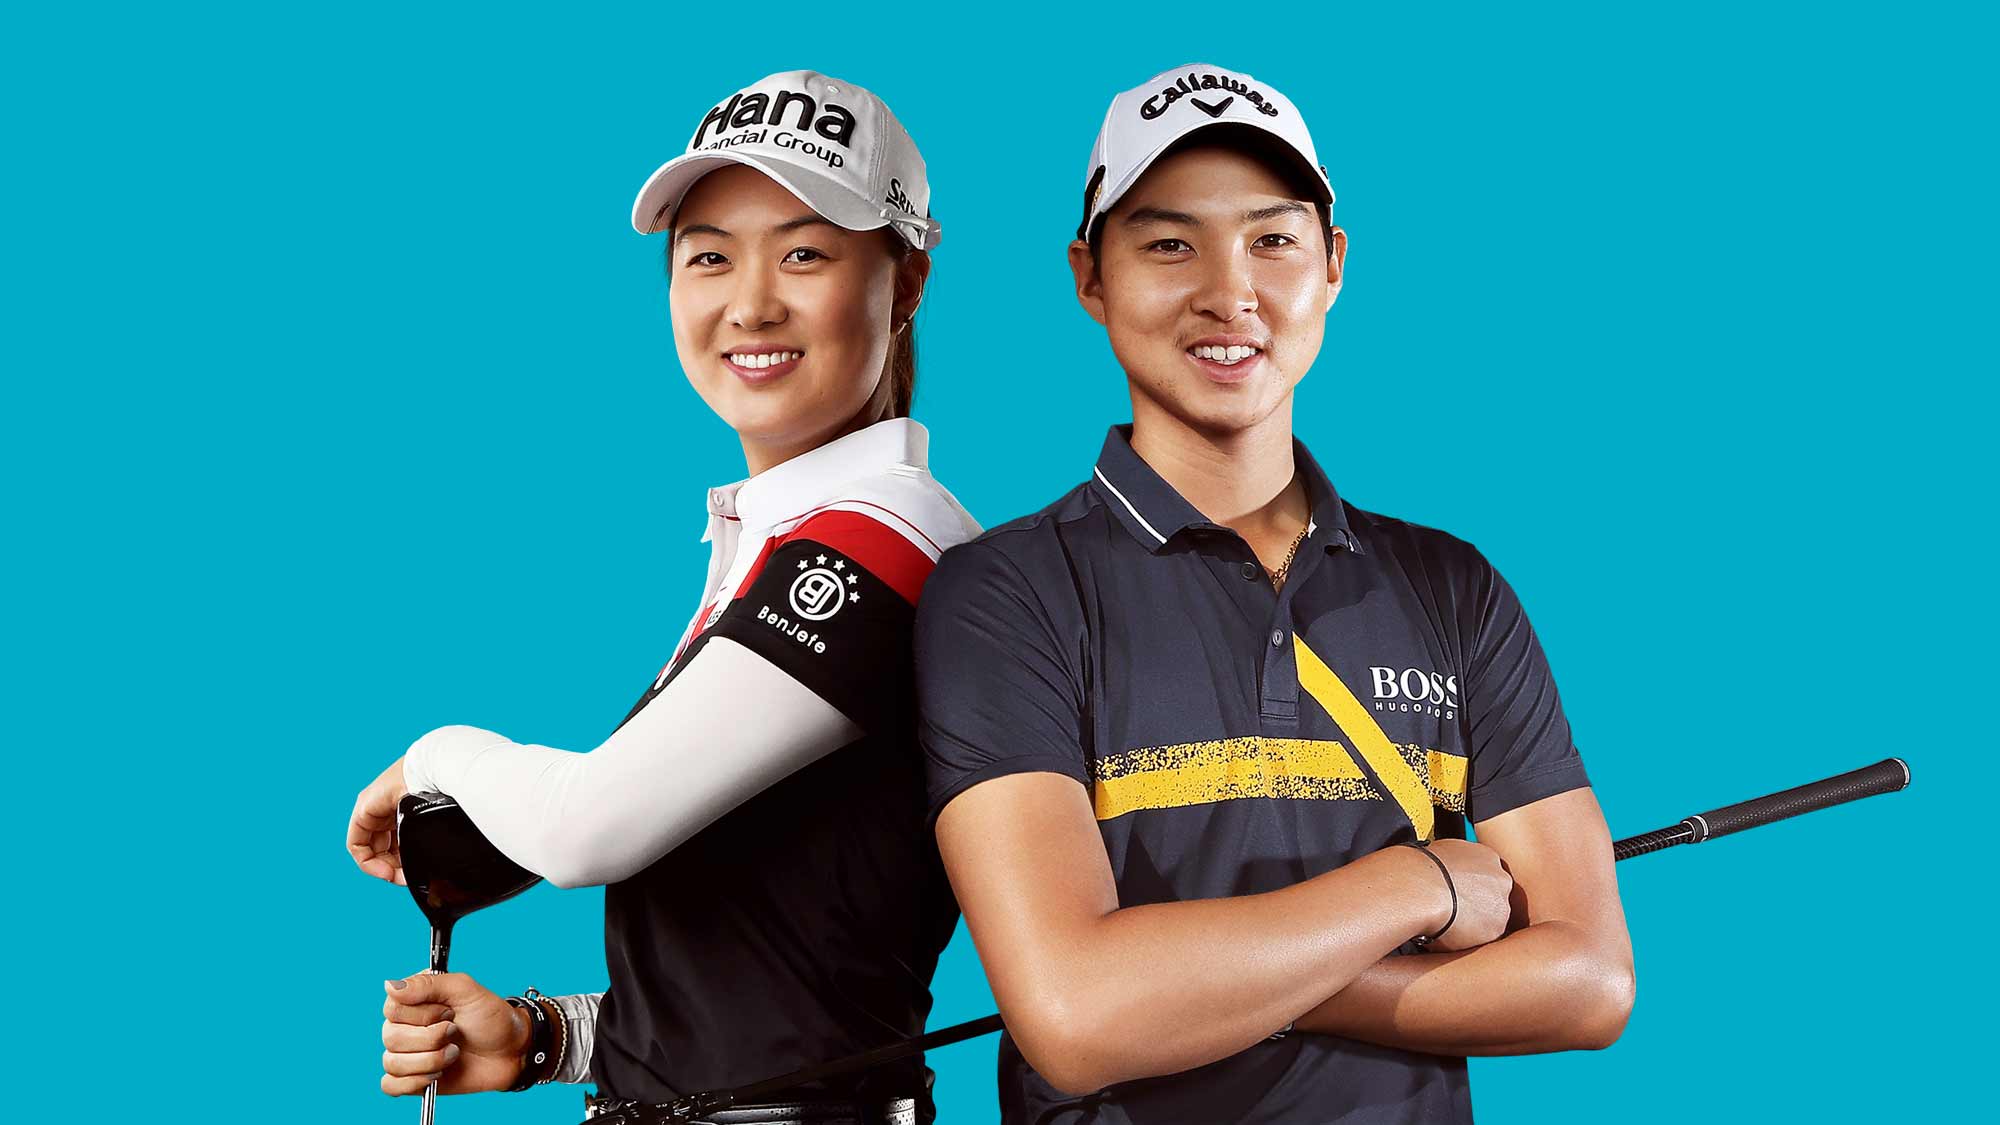 EXCLUSIVE INTERVIEW Could Minjee and Min Woo Lee golf’s